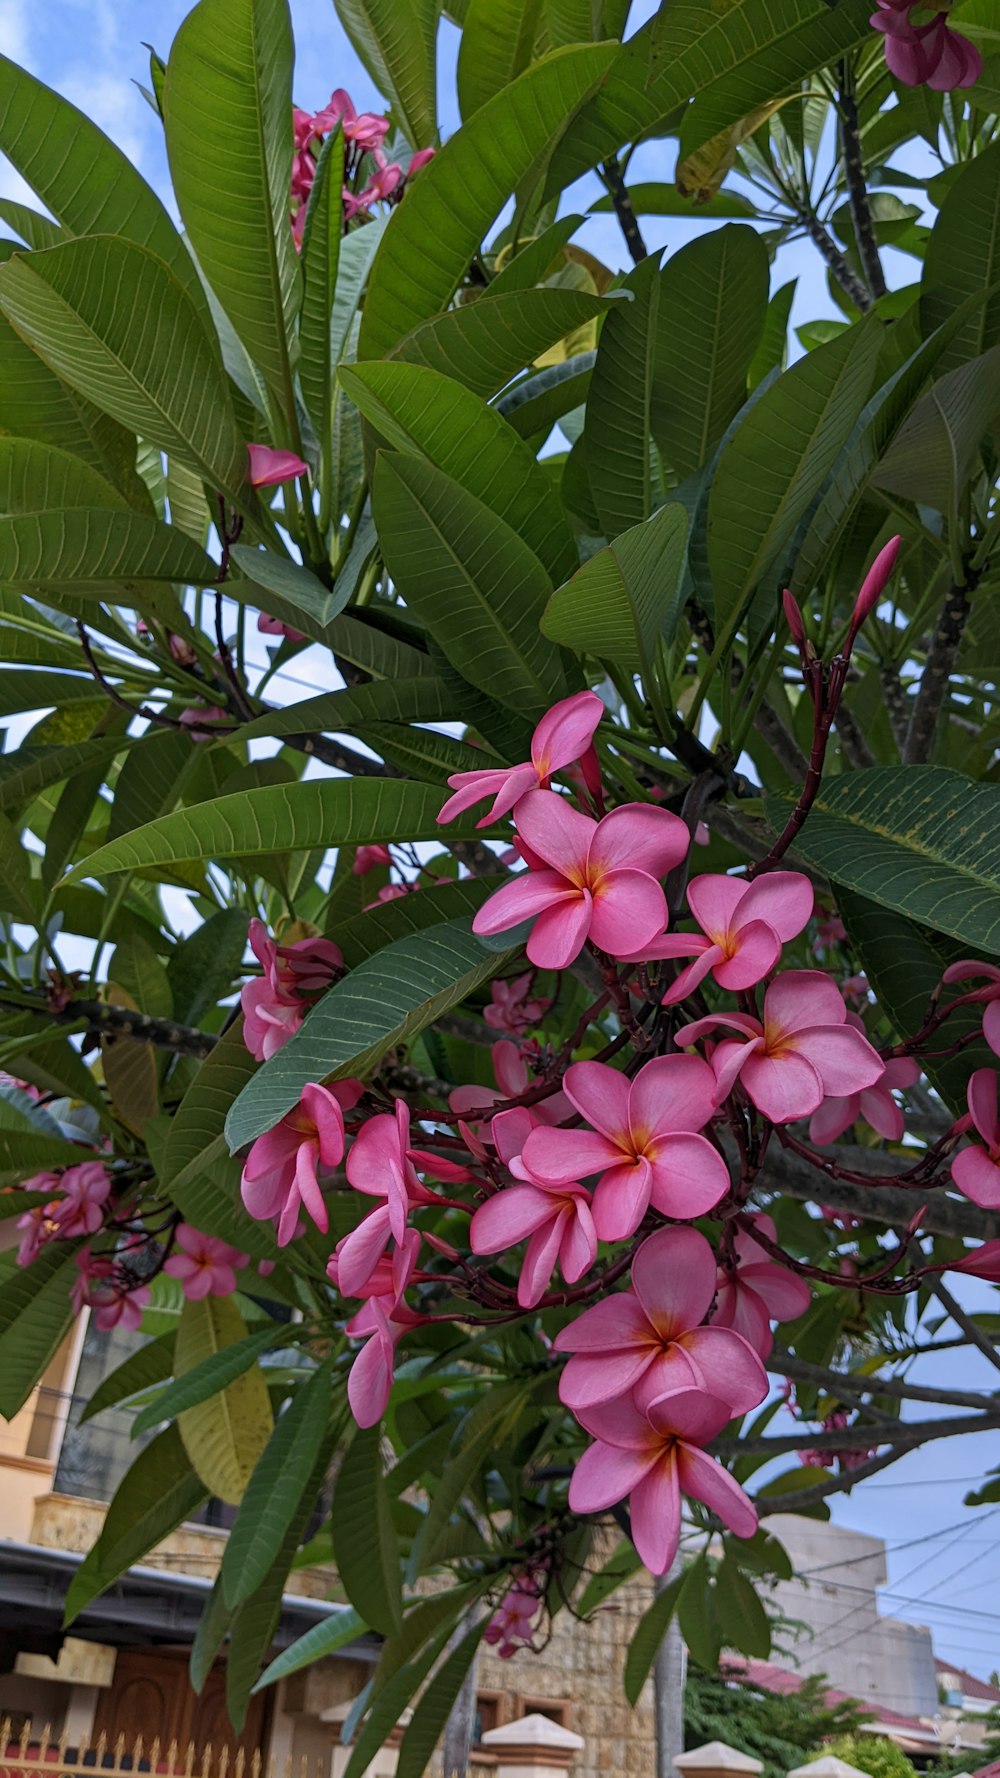 pink flowers are blooming on a tree outside